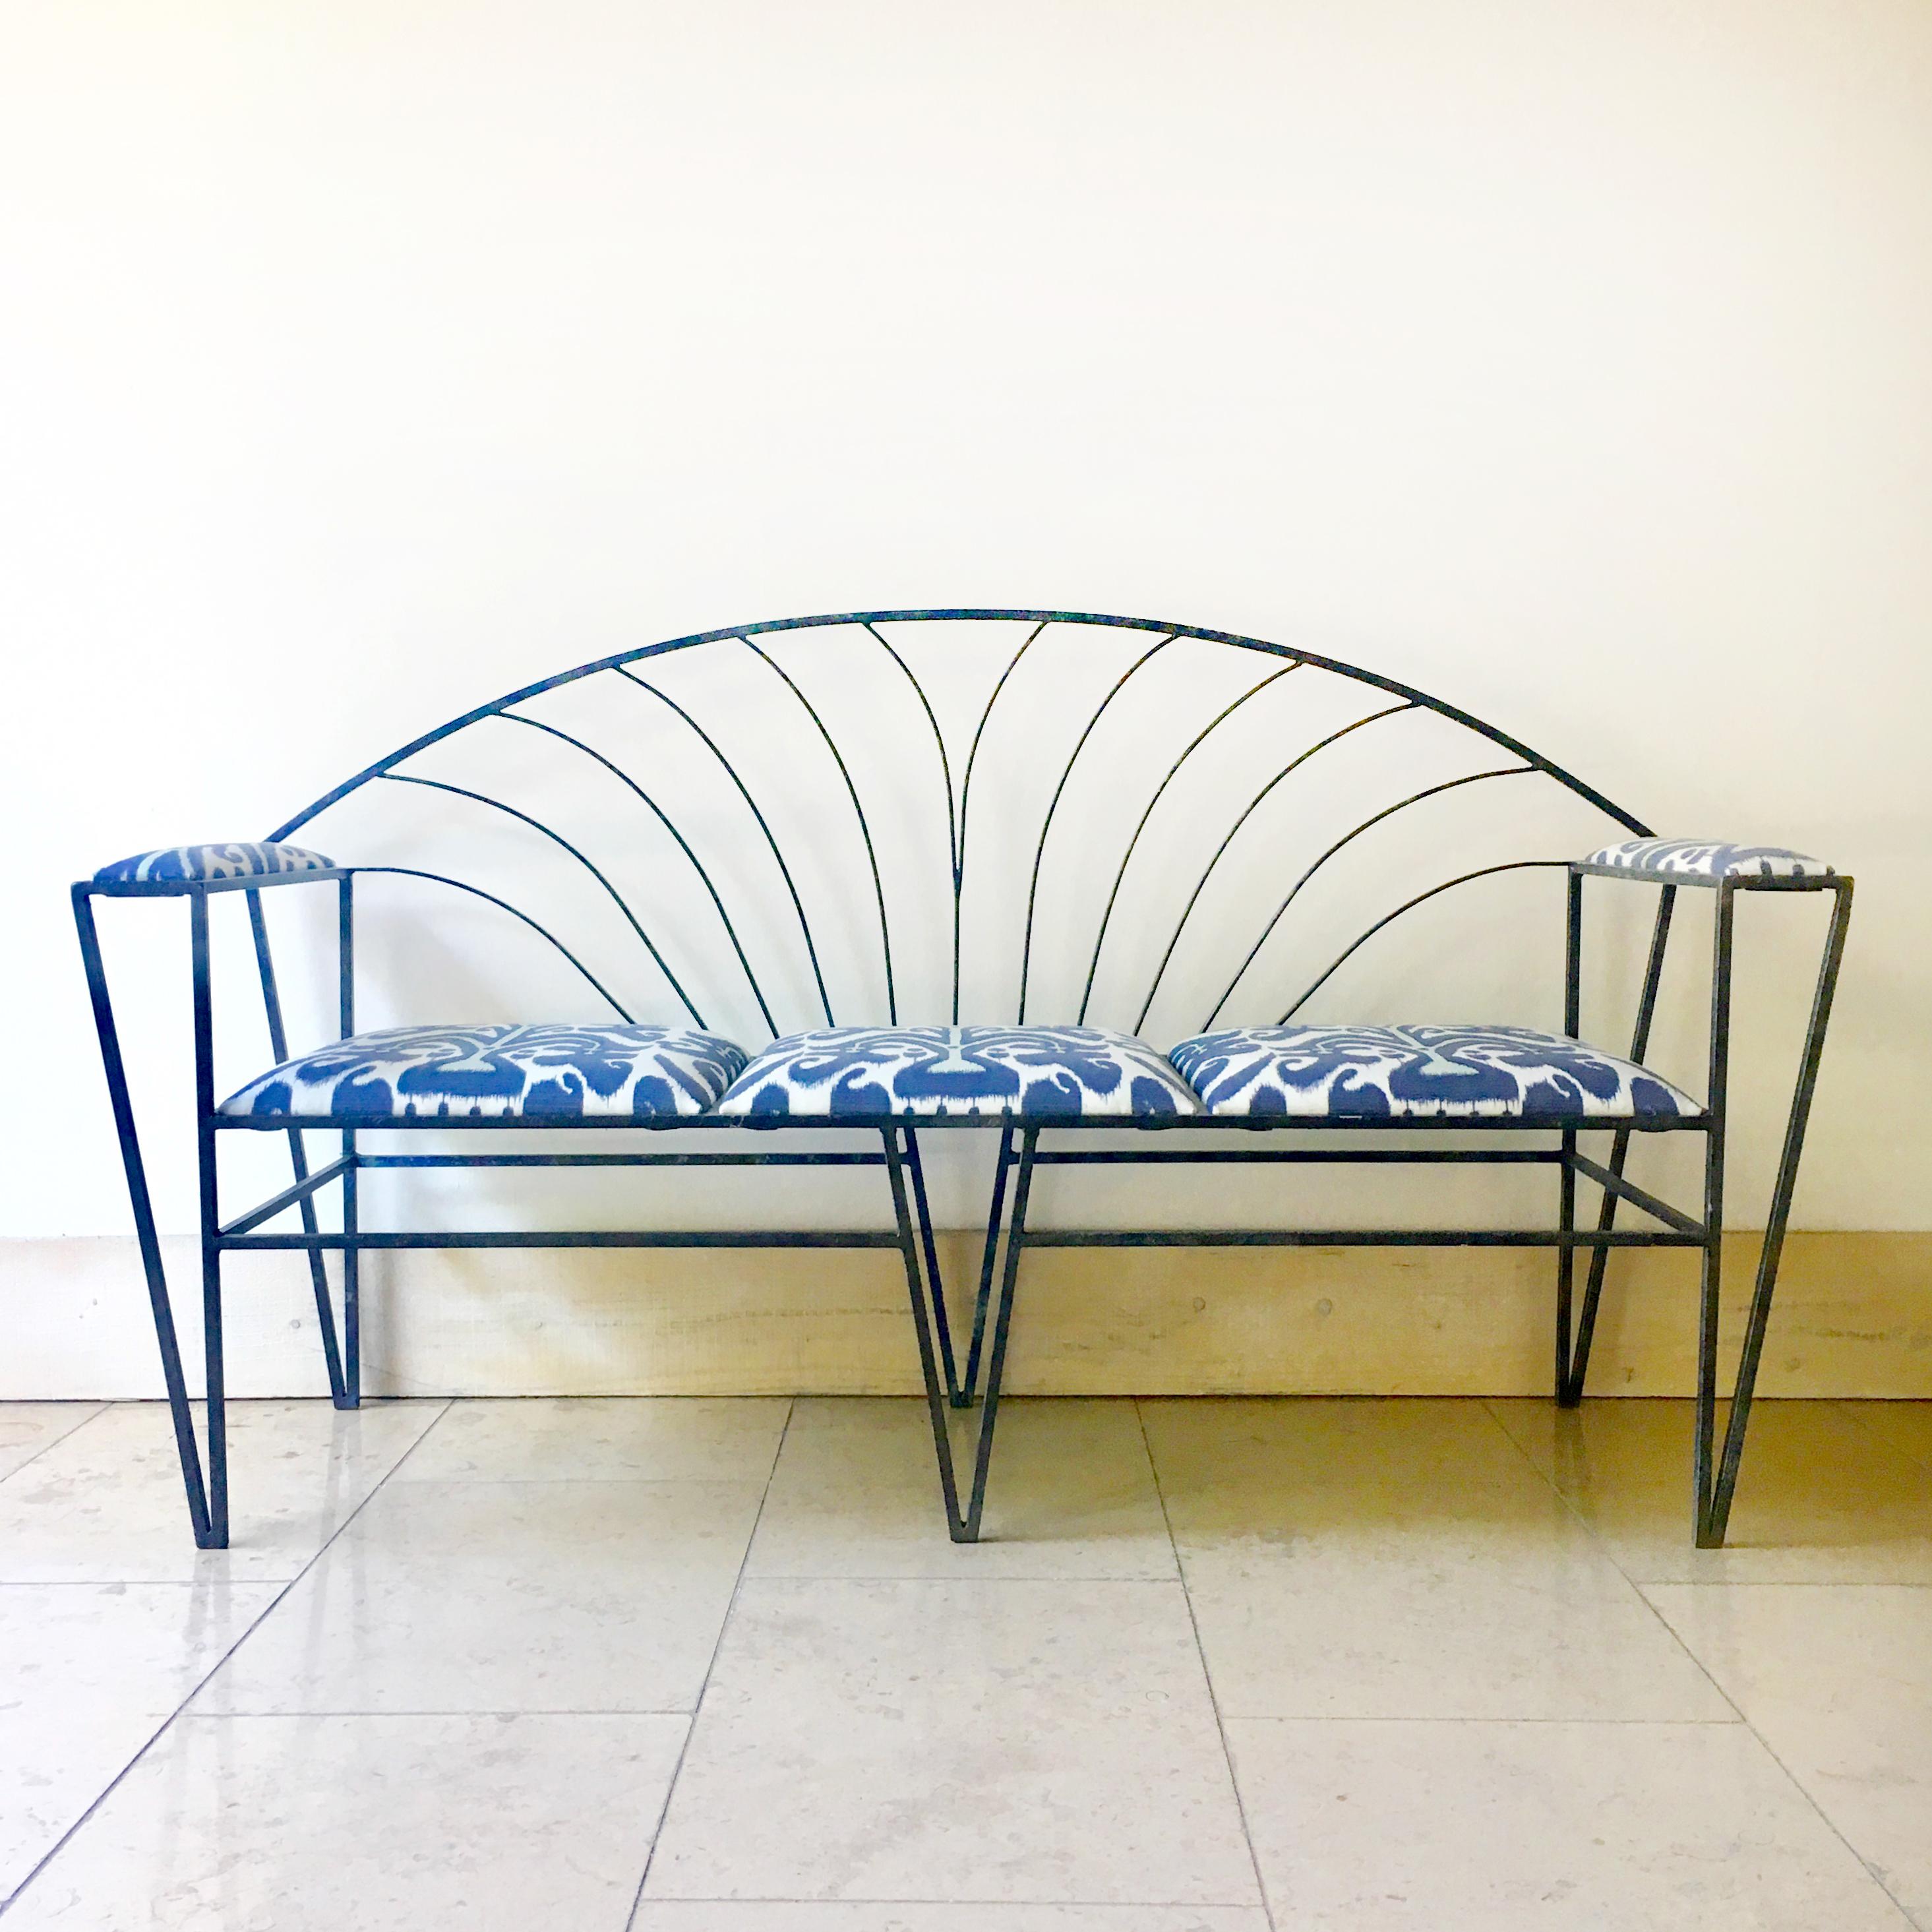 French Art Deco Wrought Iron Bench 1930s (Art déco) im Angebot